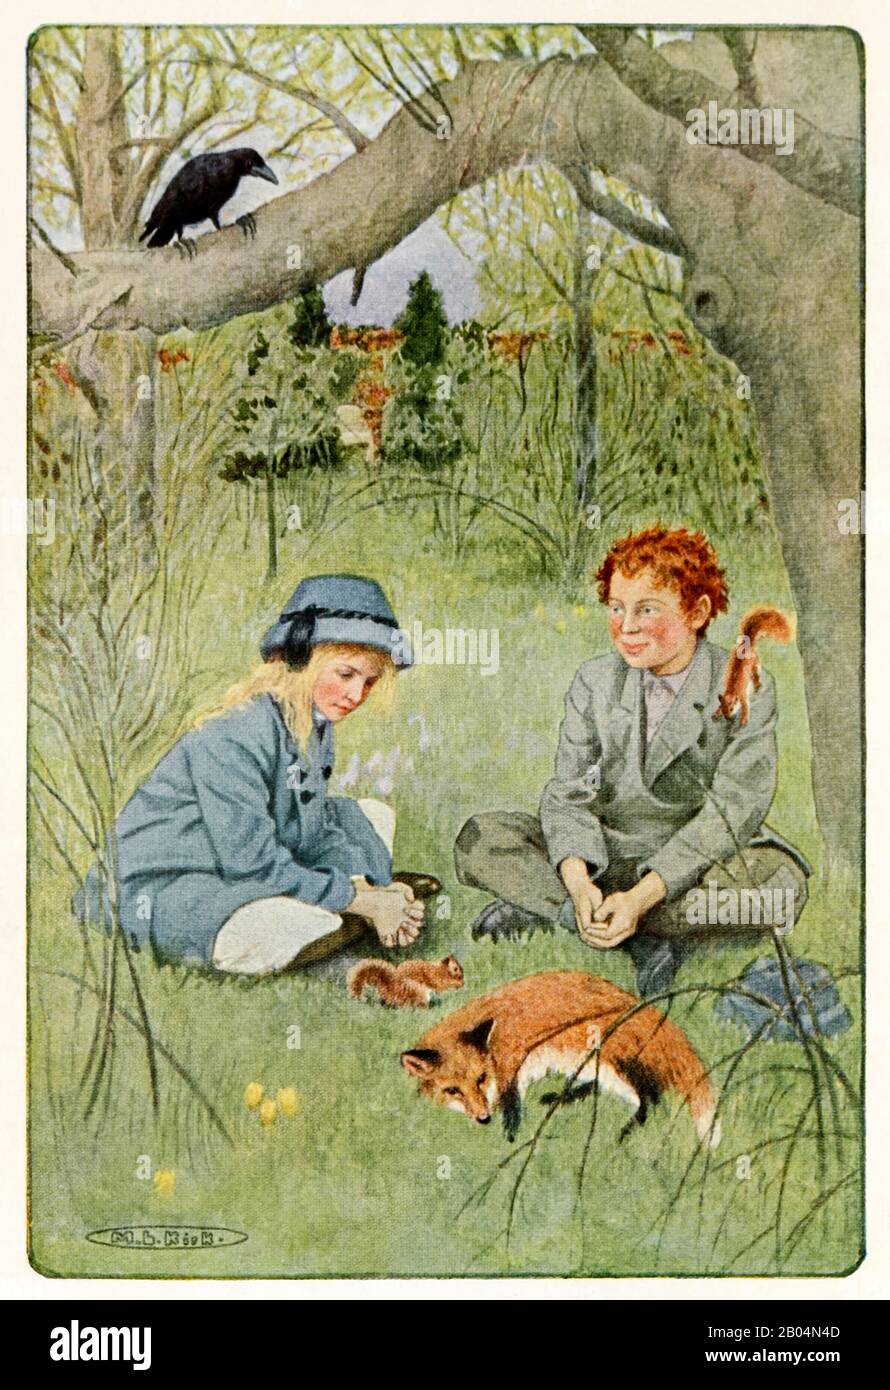 “It seemed scarcely bearable to leave such delightfulness” from The Secret Garden by Frances Hodgson Burnett (1849-1924). Illustration shows Mary and Dickon in the locked garden with Captain the fox, Soot the crow, and Nut and Shell, two squirrels. Photograph of first American edition published in 1911 with illustrations by Maria Louise Kirk (1860-1938). Stock Photo